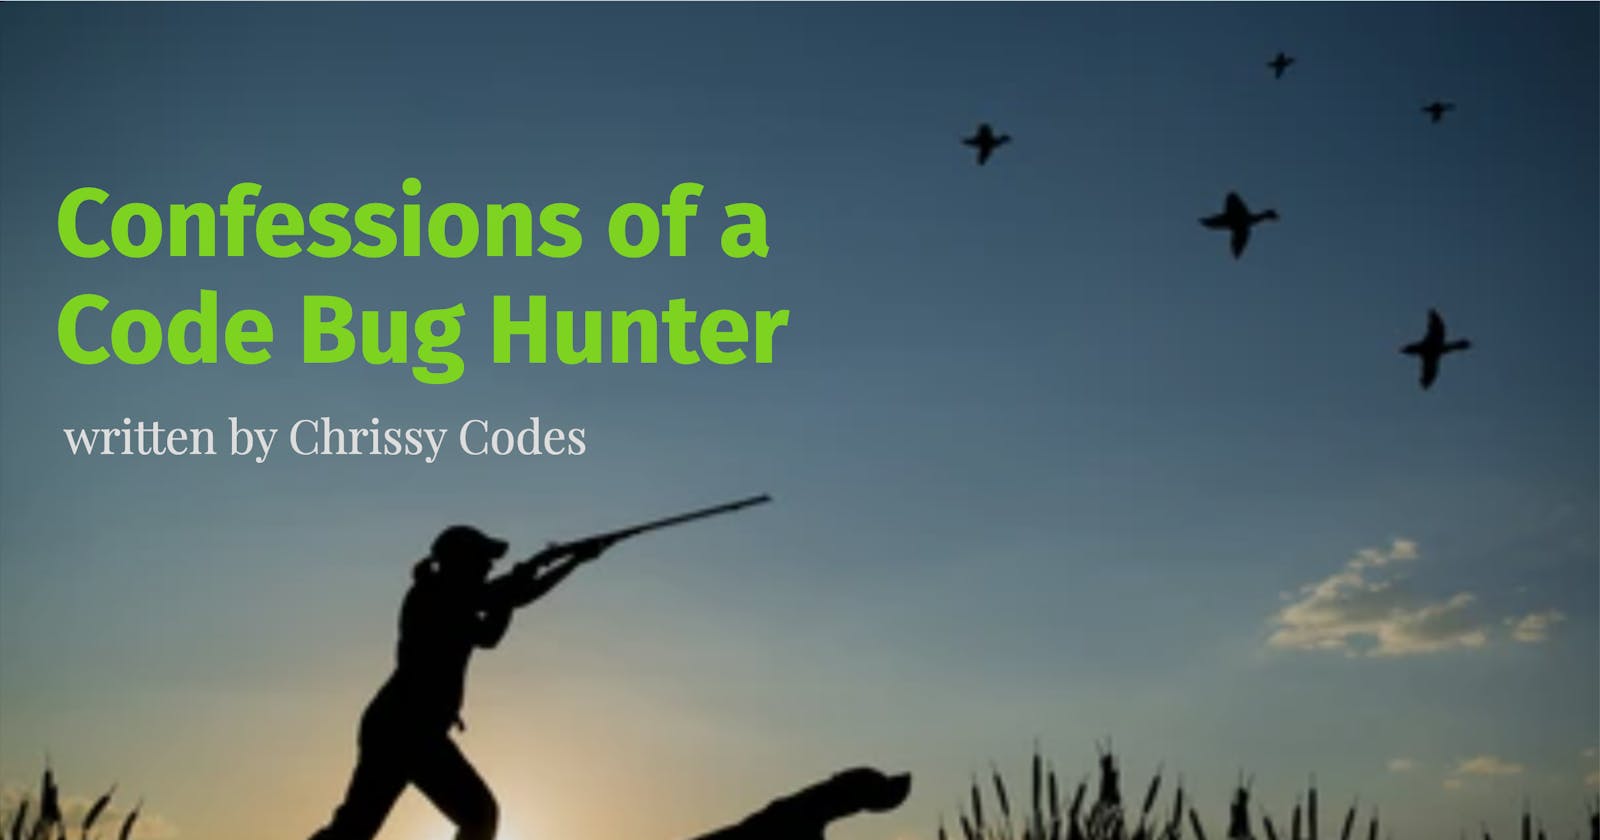 Confessions of a Code Bug Hunter